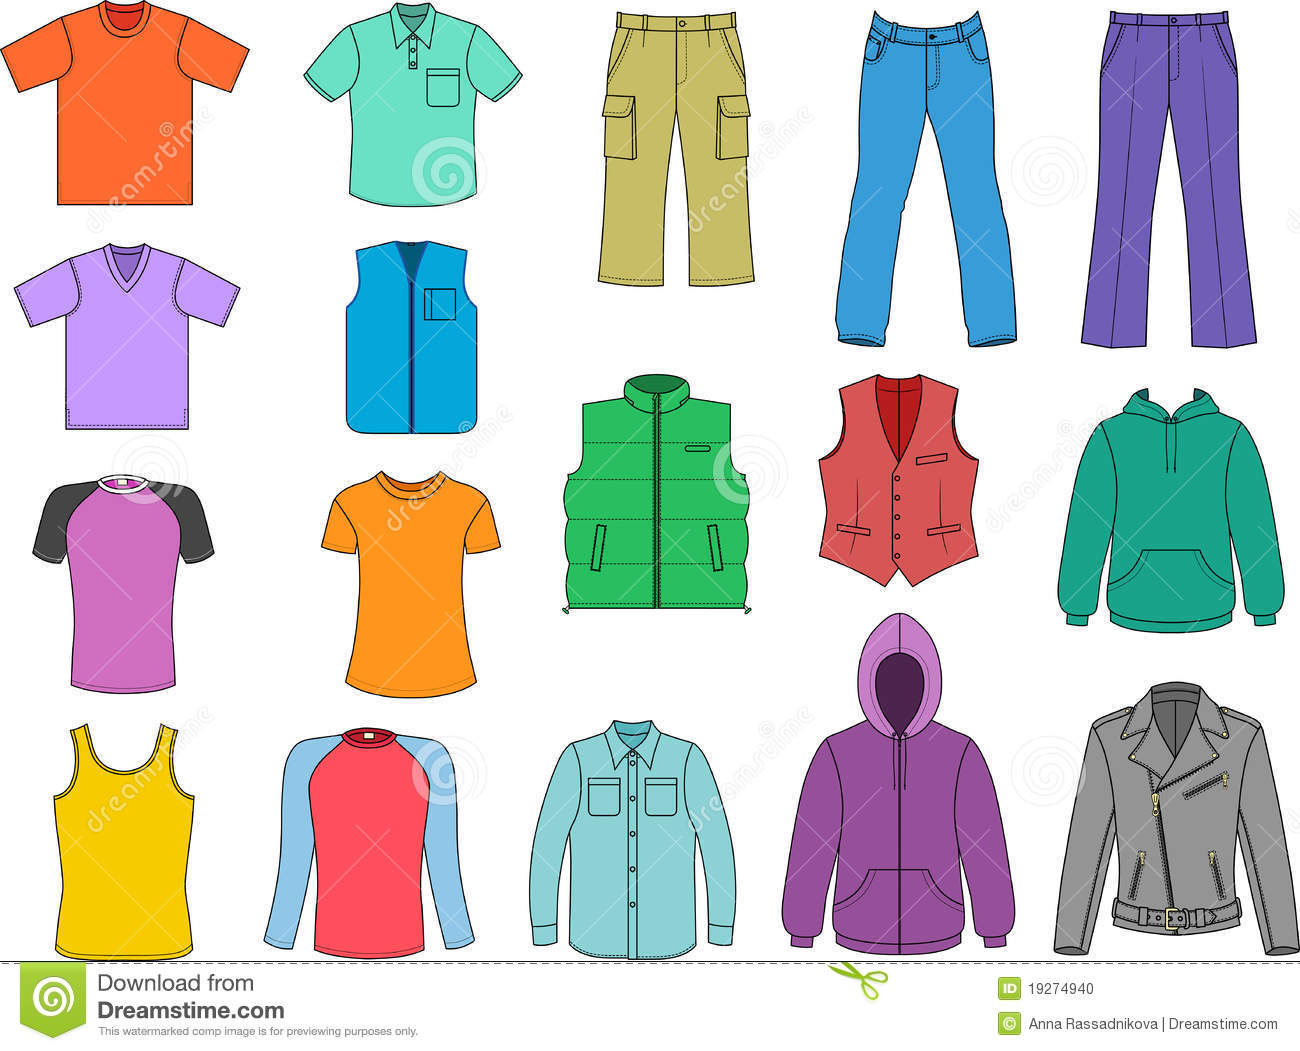 clothing clipart